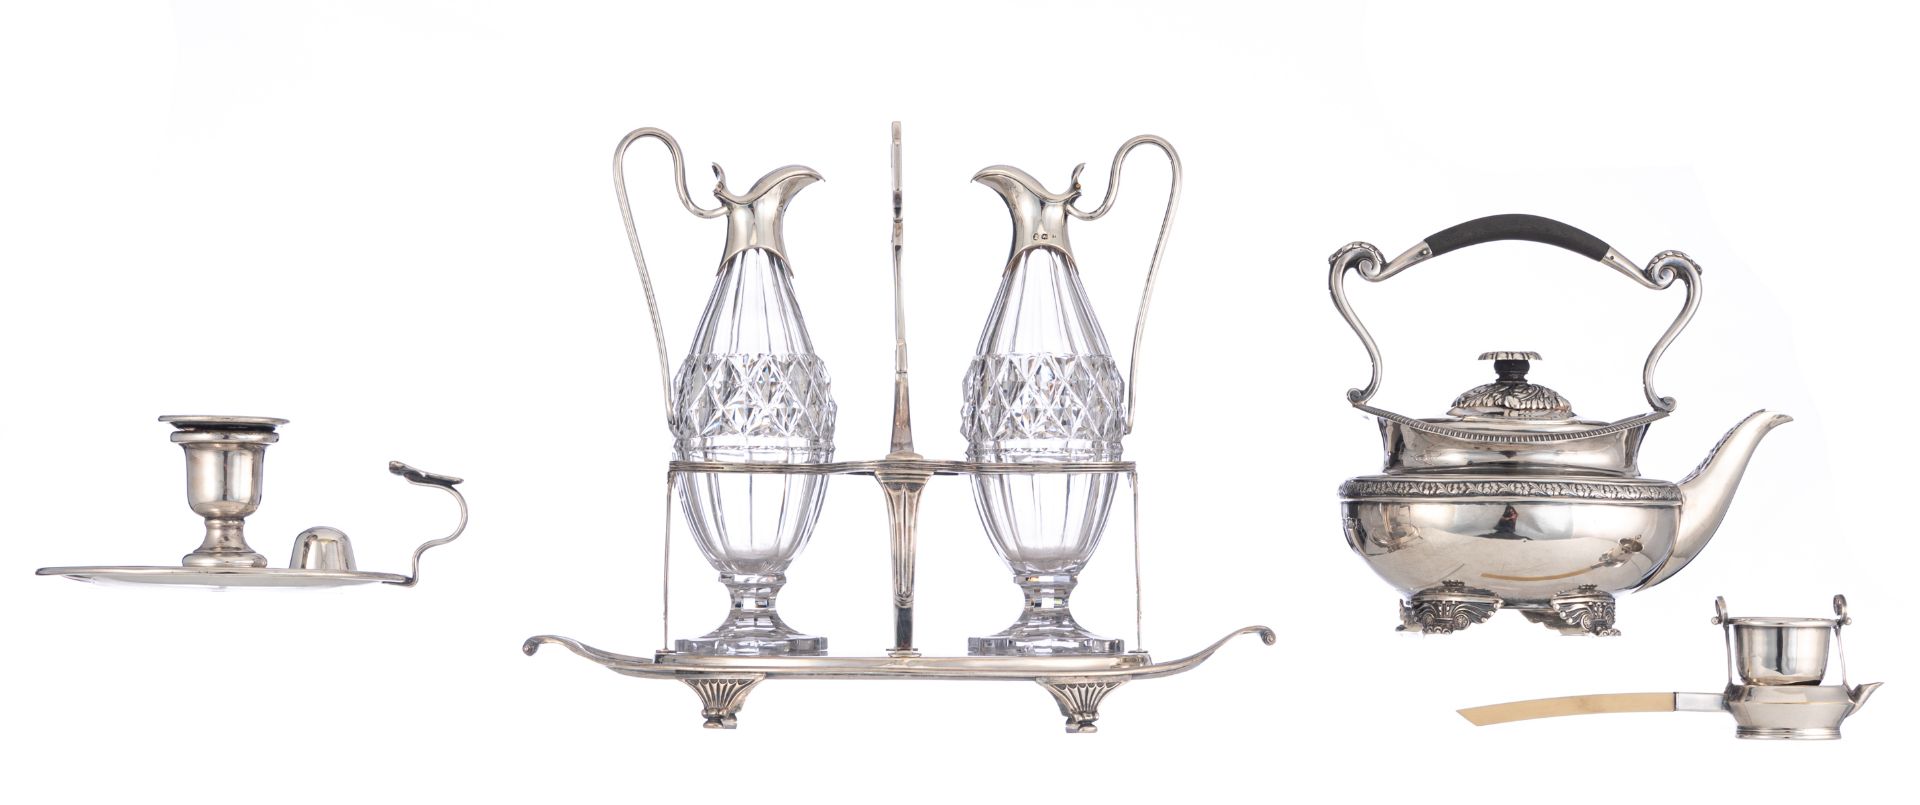 Four 19th & 20thC silver items consisting of an oil and vinegar set with its original cut crystal fl - Image 3 of 18